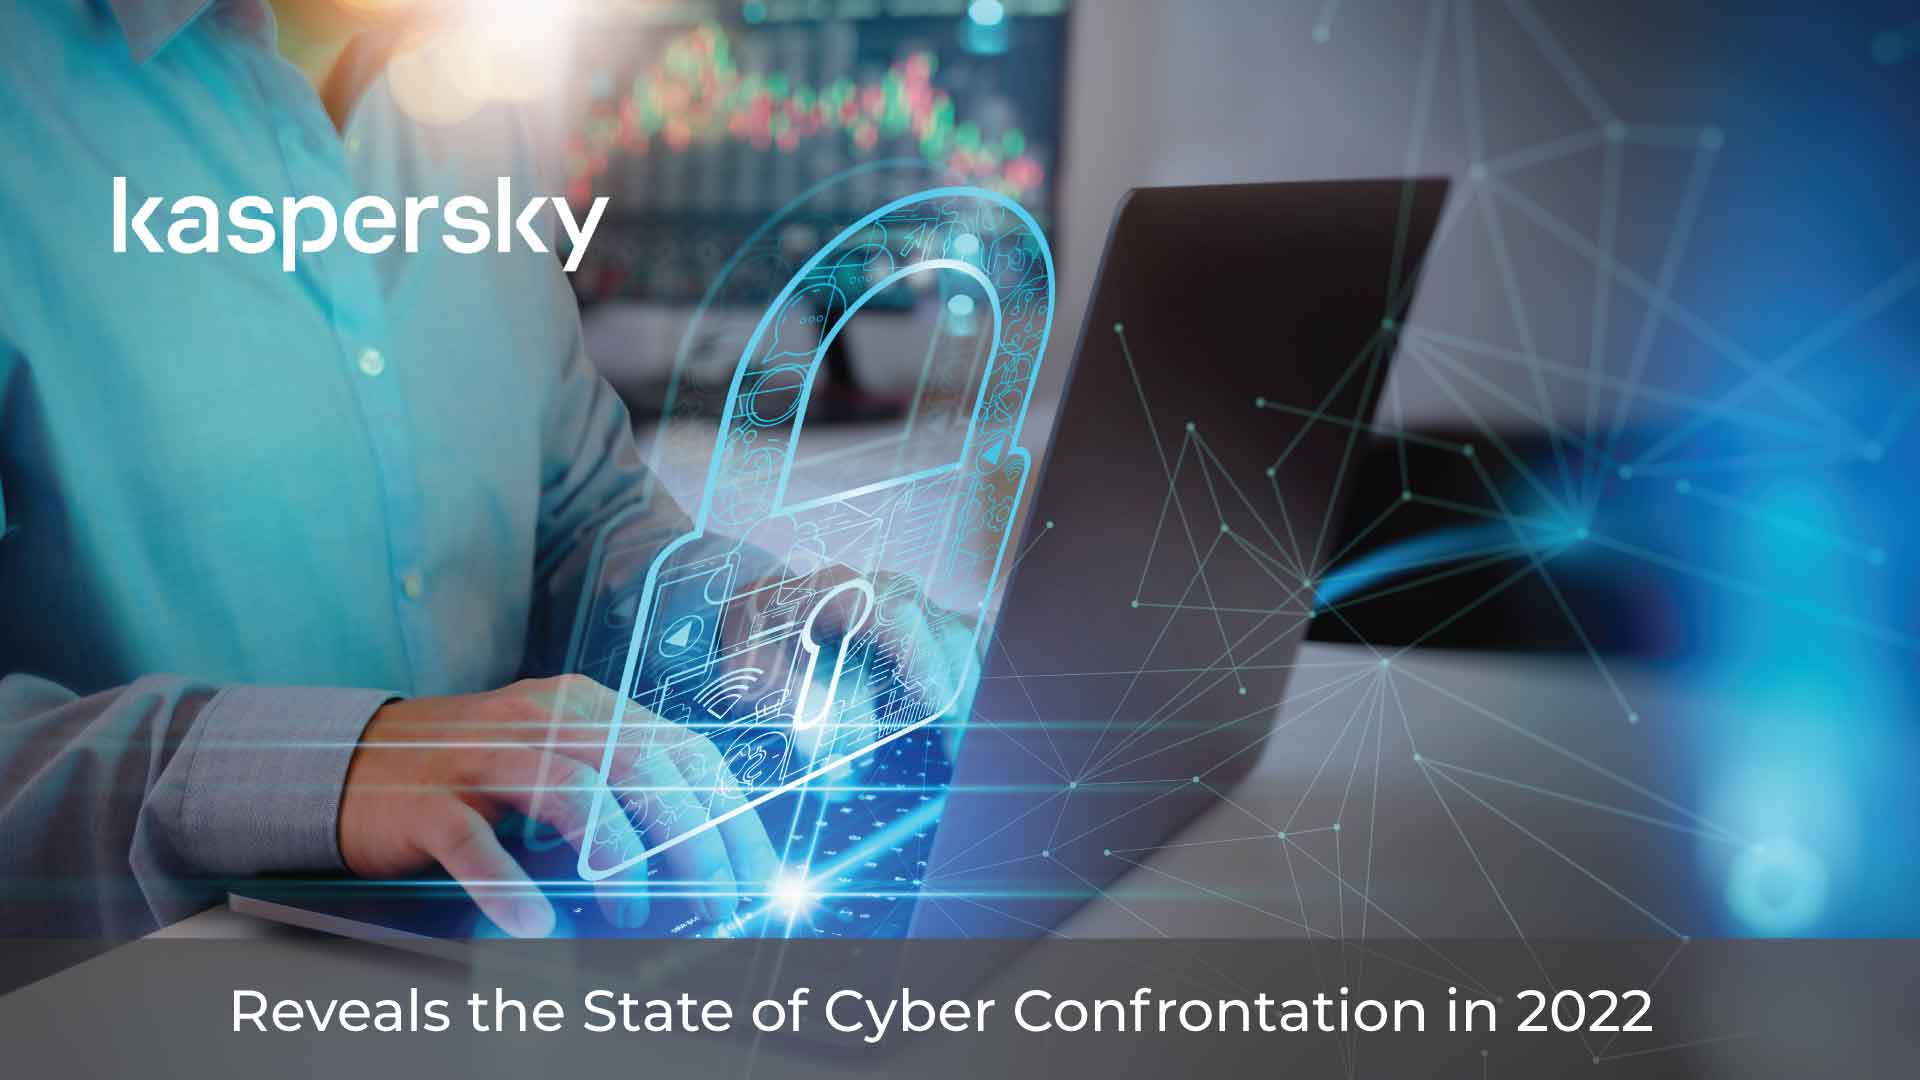 Kaspersky uncovers what cyber confrontation looked like in 2022